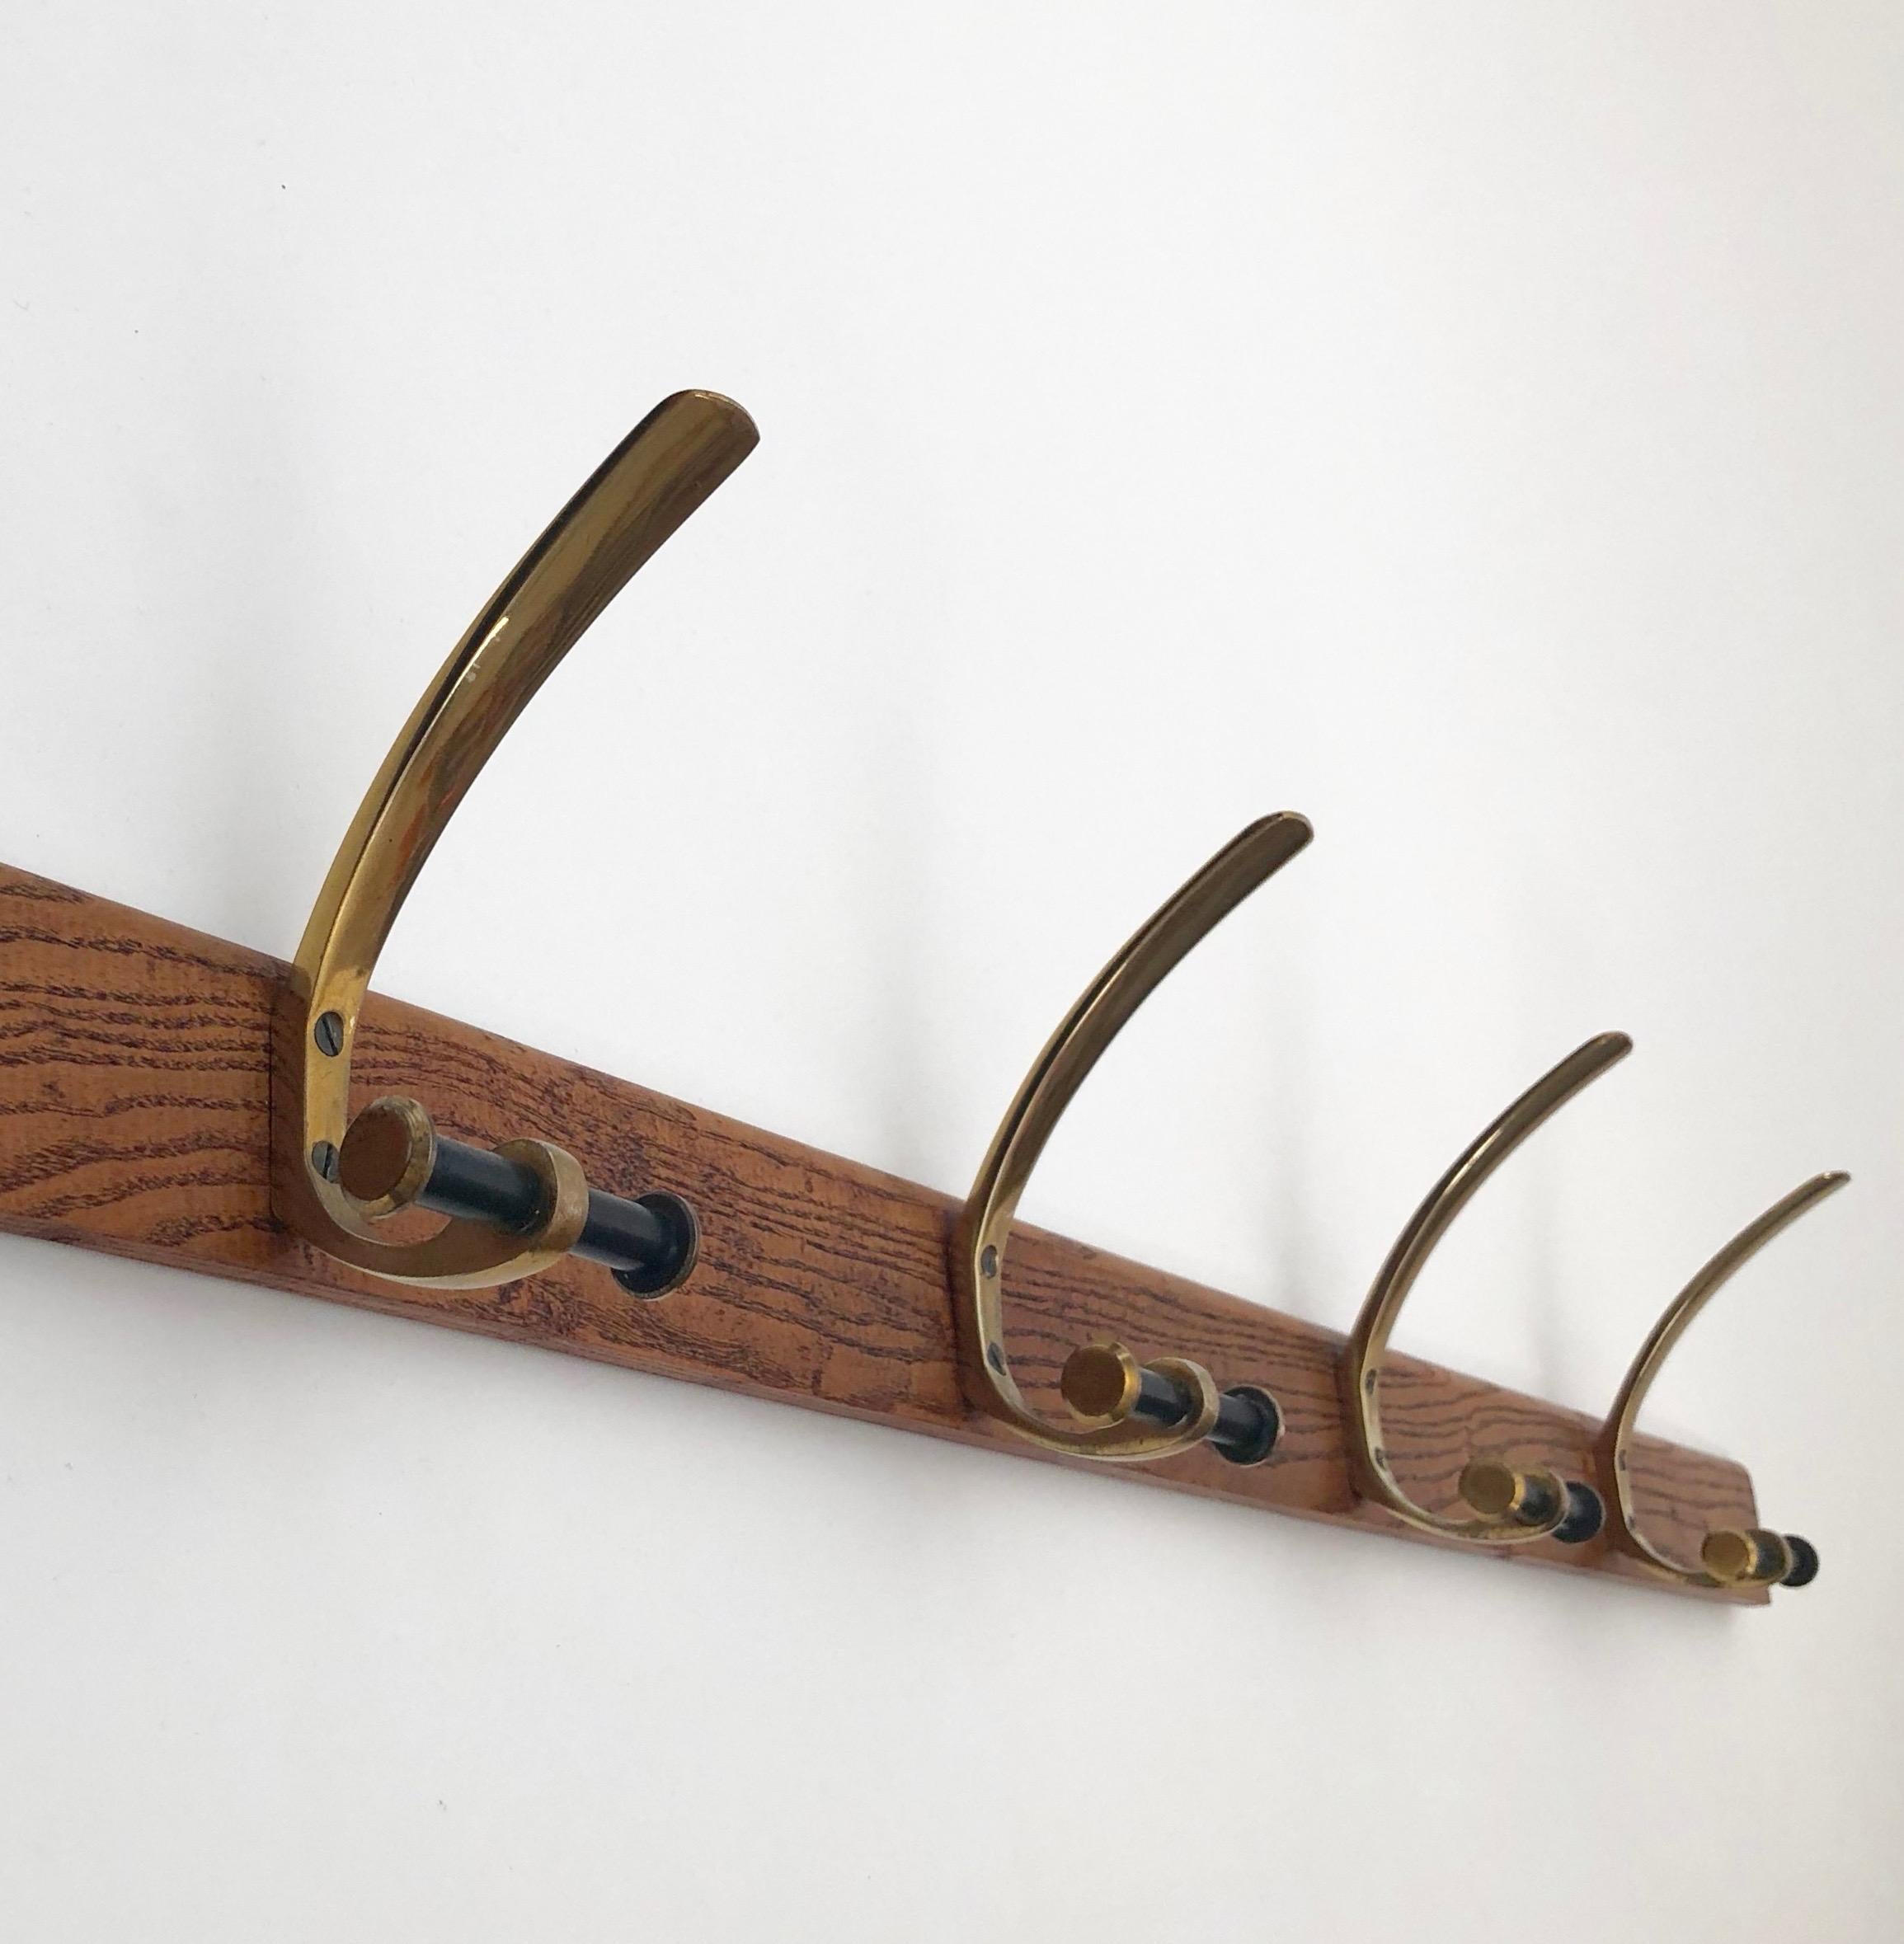 Four brass wall hooks from Hetha Baller mounted on a oak wood frame. The frame can be attached to the wall with screws.
The wood has been oiled and finished with wax. To the touch, its baby smooth.